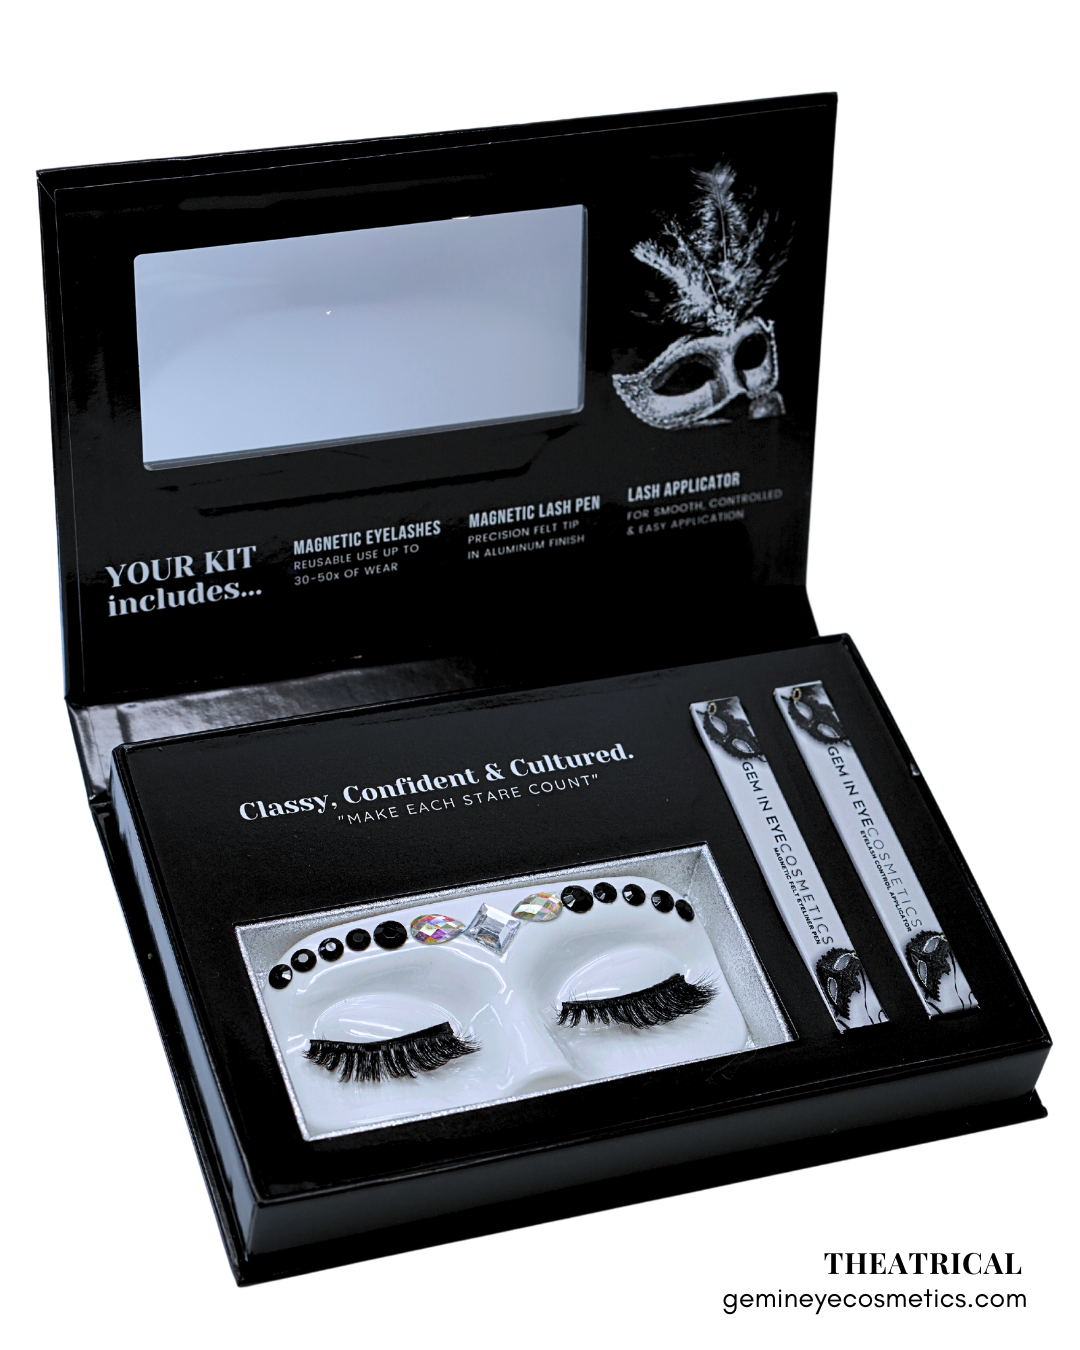 GEM IN EYE Cosmetics Lash &amp; Flash™ Magnetic Eyelashes kit has a pair of classy magnetic eyelashes in a face tray adorned with gems. This kit comes complete package with a smudge-free, waterproof, and latex-free magnetic eyeliner in an aluminum bottle in a matte finish. It has a stainless ball inside that keeps the magnetic eyeliner fresh and long-lasting. Completing the set is an angled lash applicator for precision and hassle-free application.